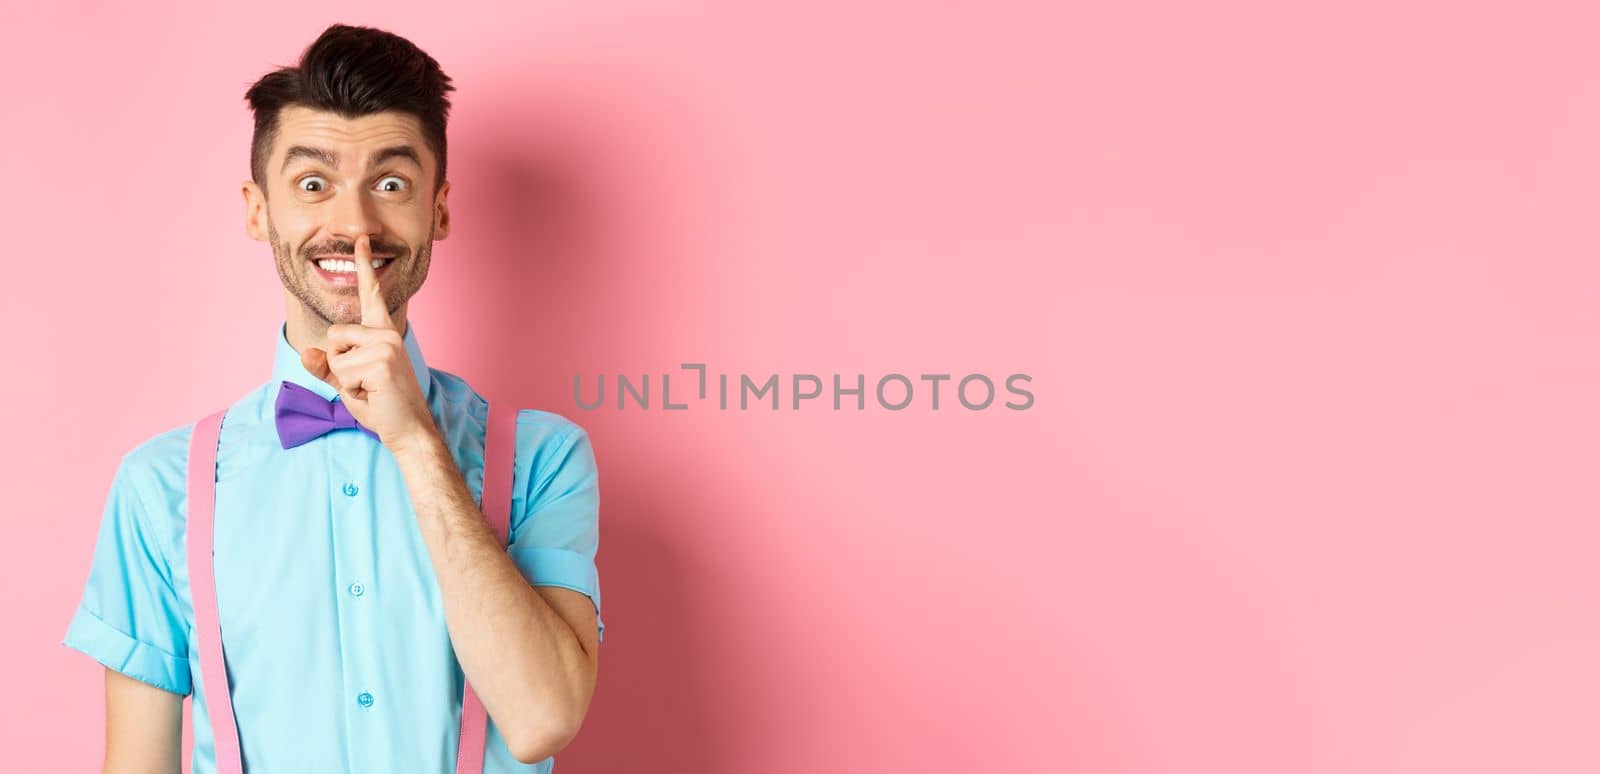 Cheerful young man making surprise, shushing at camera with happy smile, asking to keep voice down, be quiet, standing on pink background.